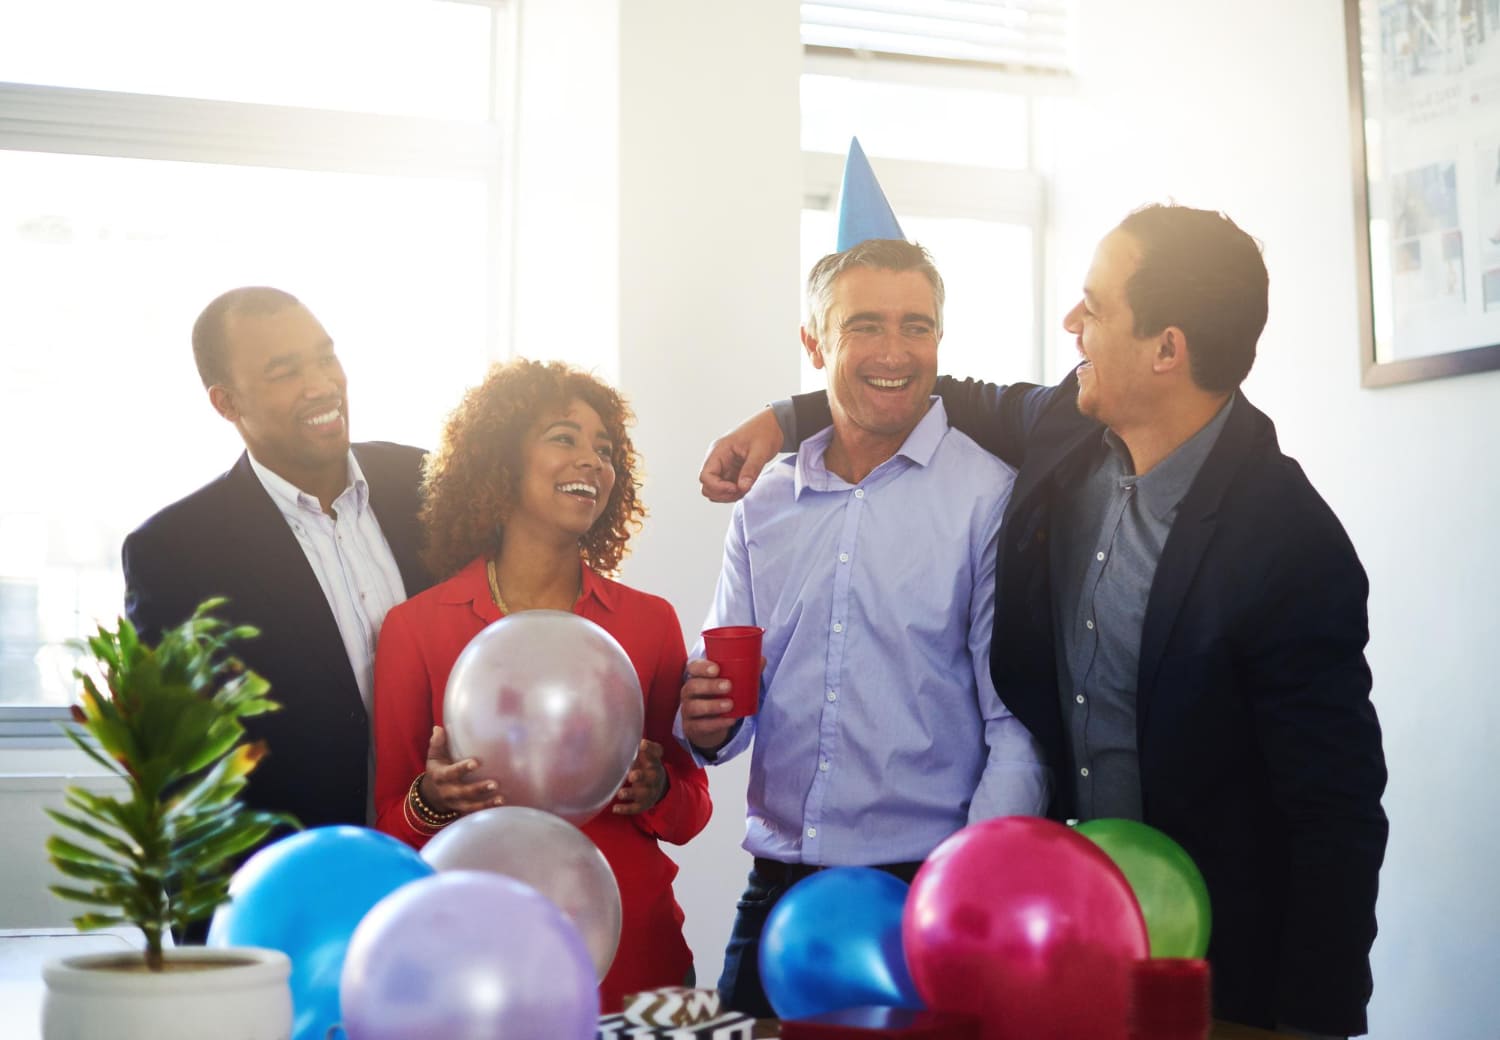 7 Best Birthday Gifts For Employees